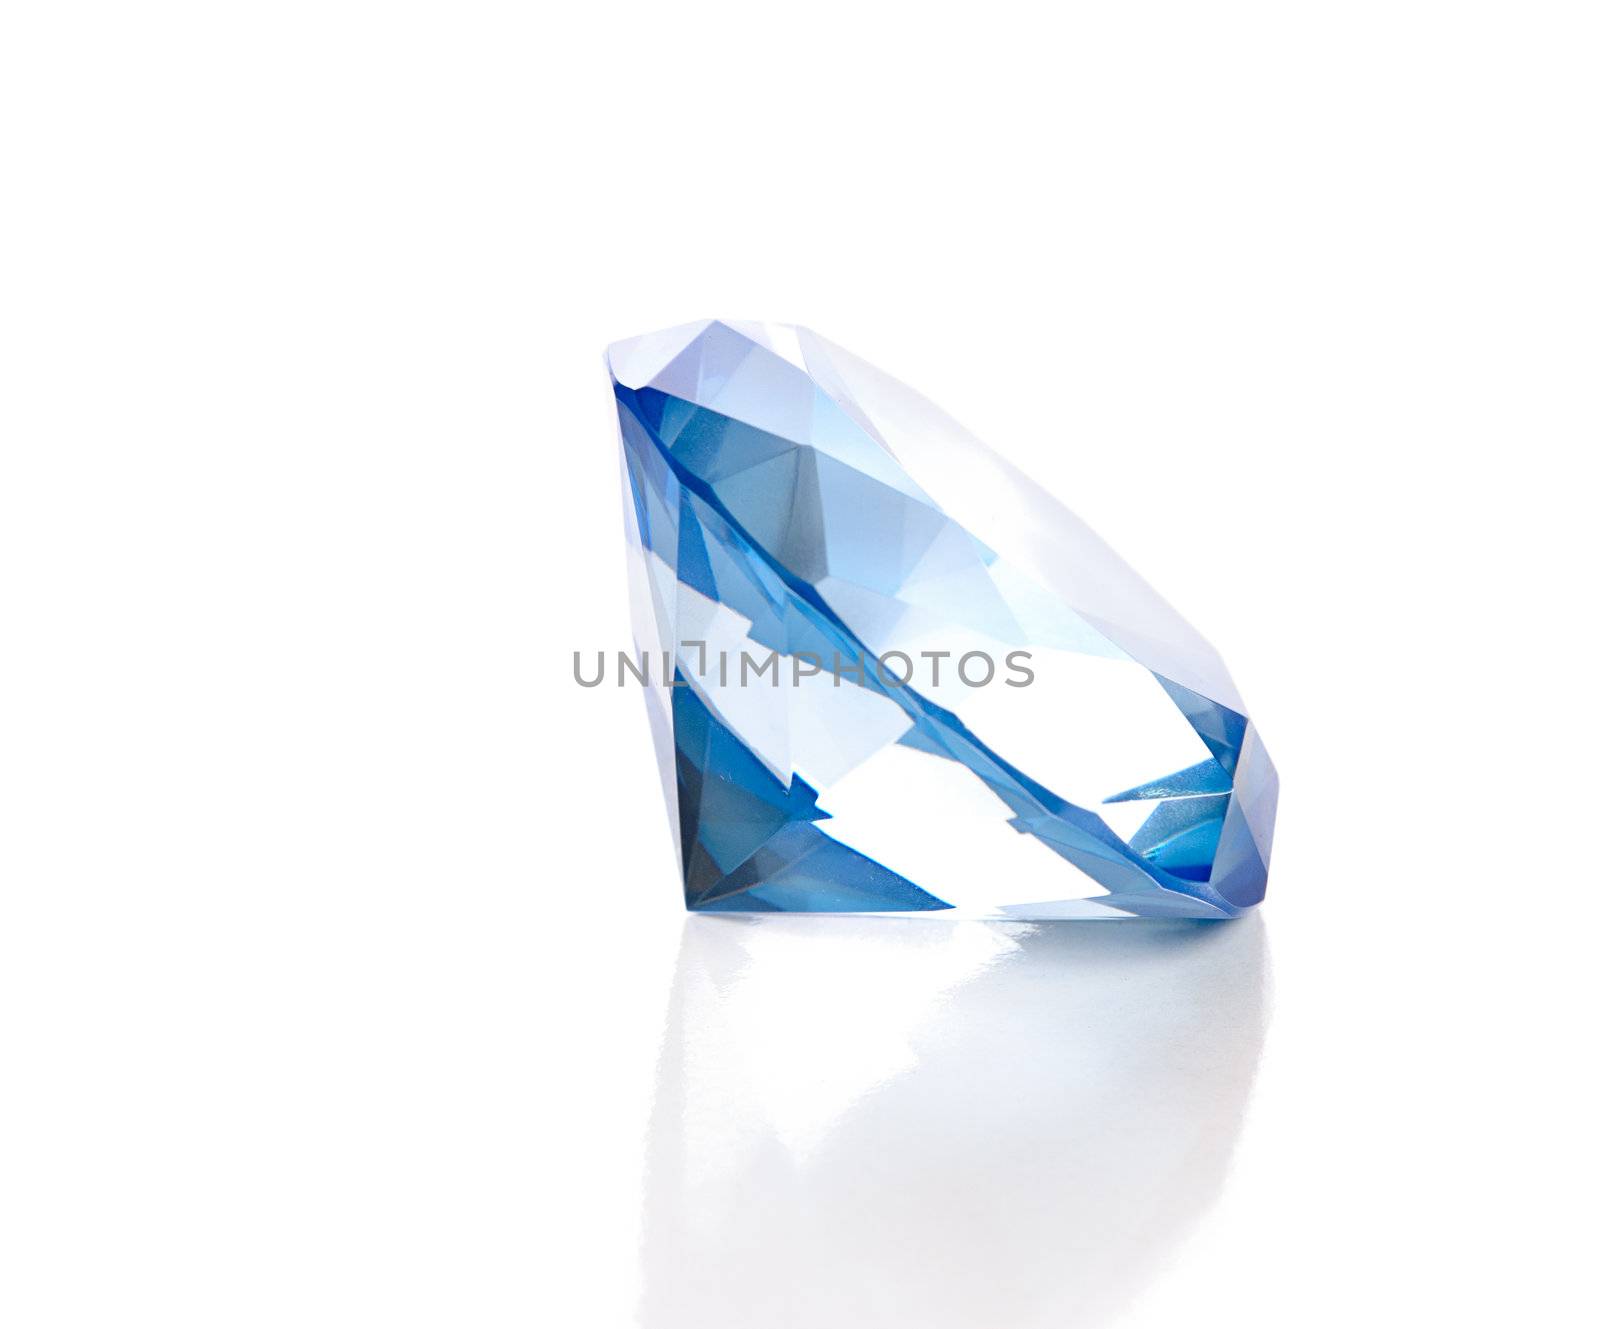 A large fake blue diamond is isolated against a white background with a reflection.